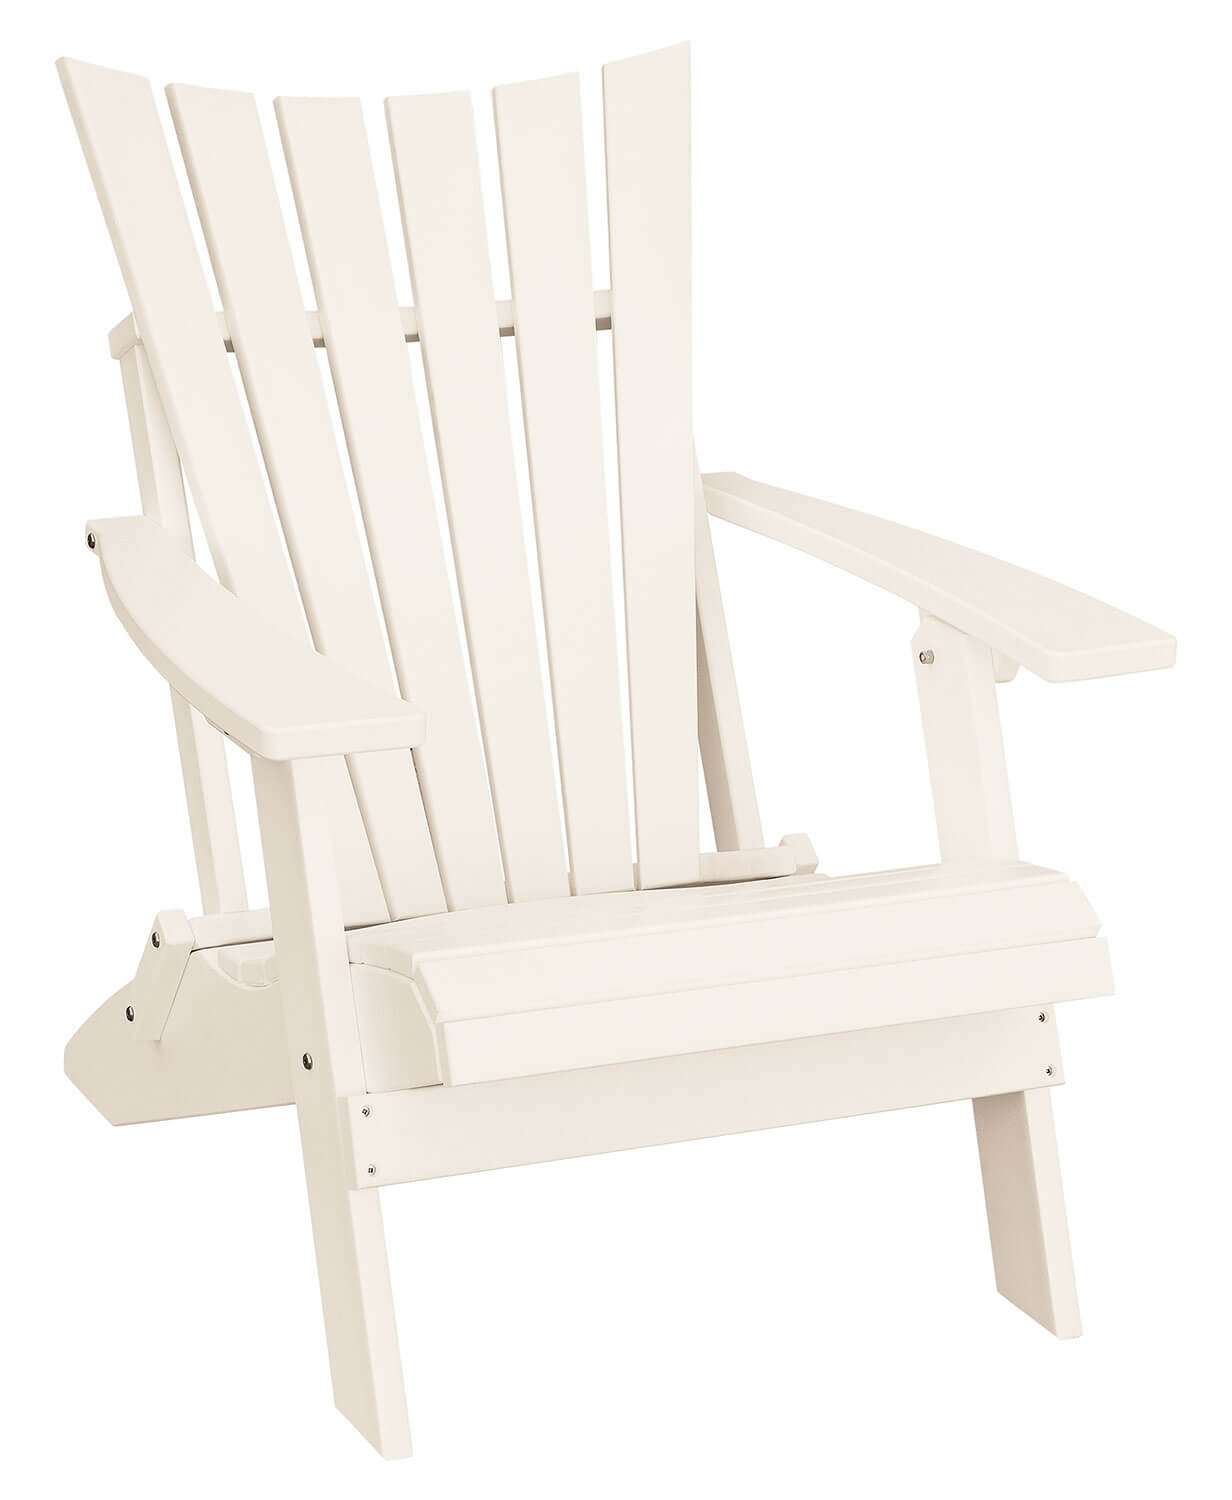 EC Woods Saranac Contemporary Folding Adirondack Outdoor Poly Chair shown in Bright White